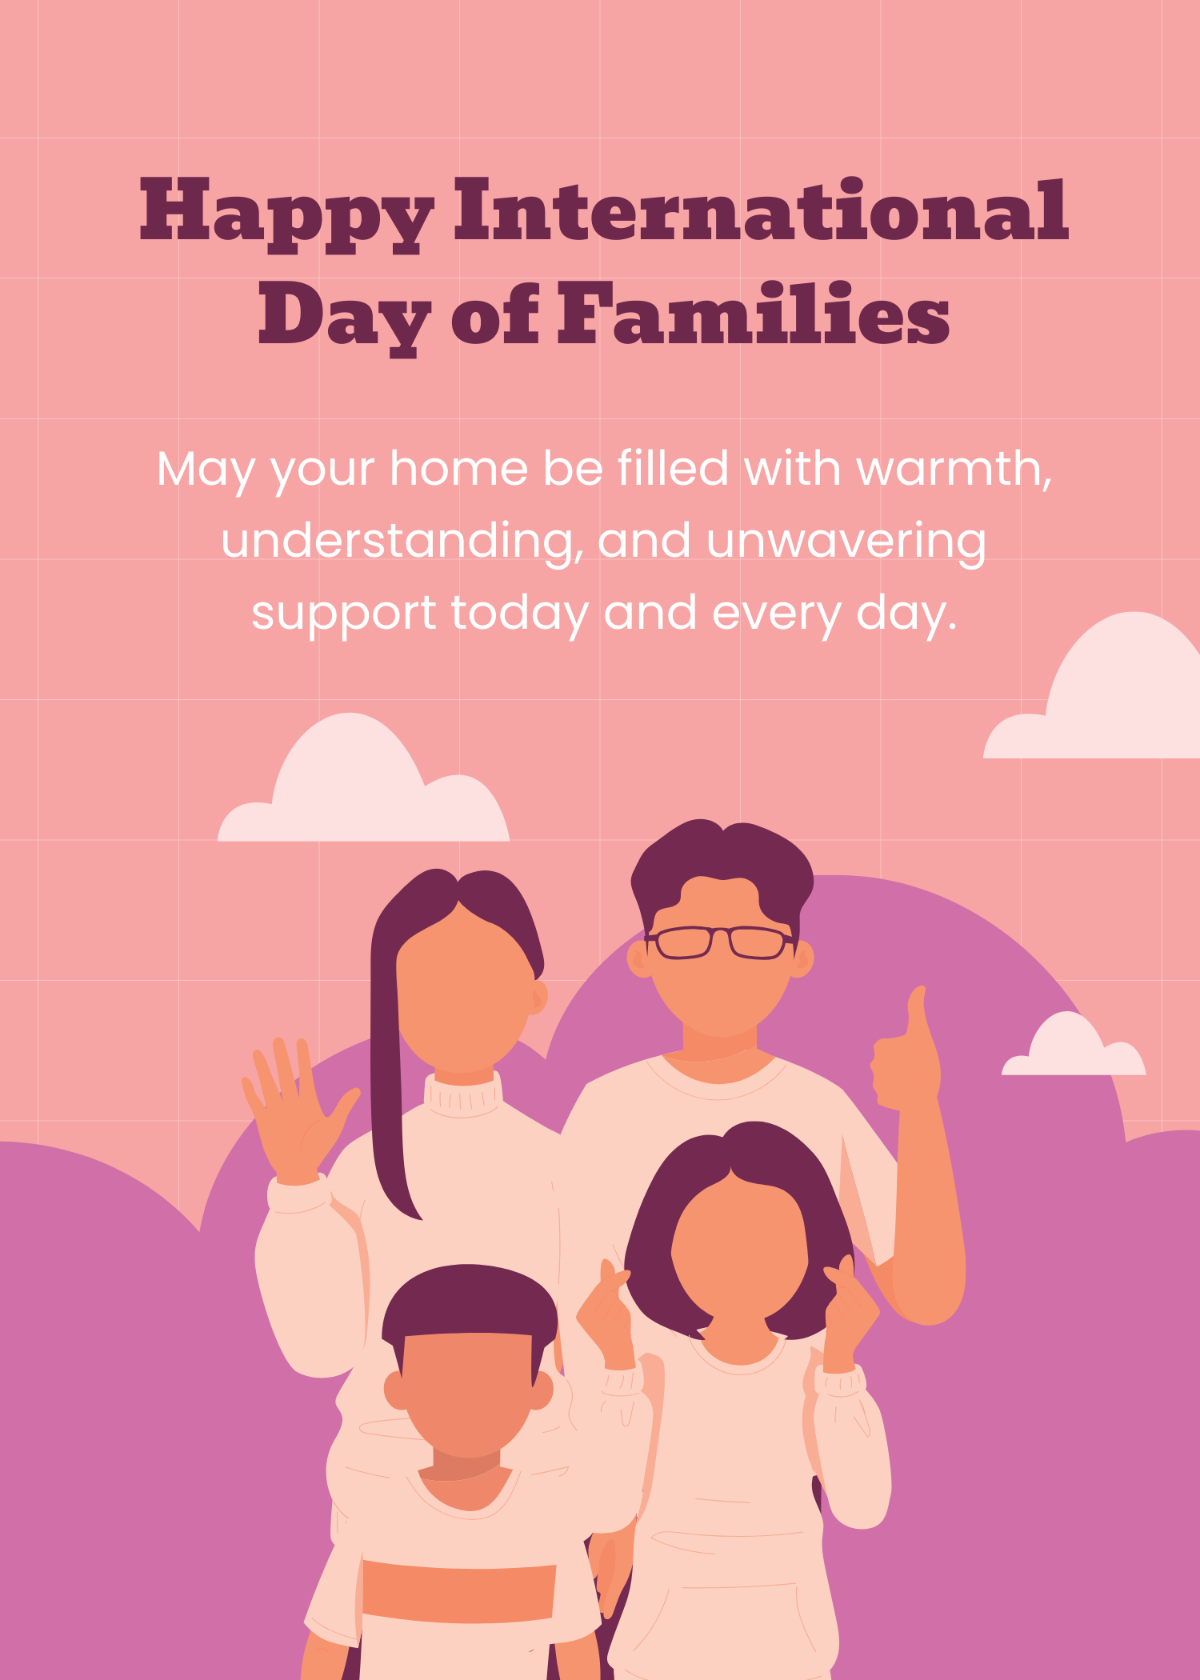 International Day of Families Wishes Template